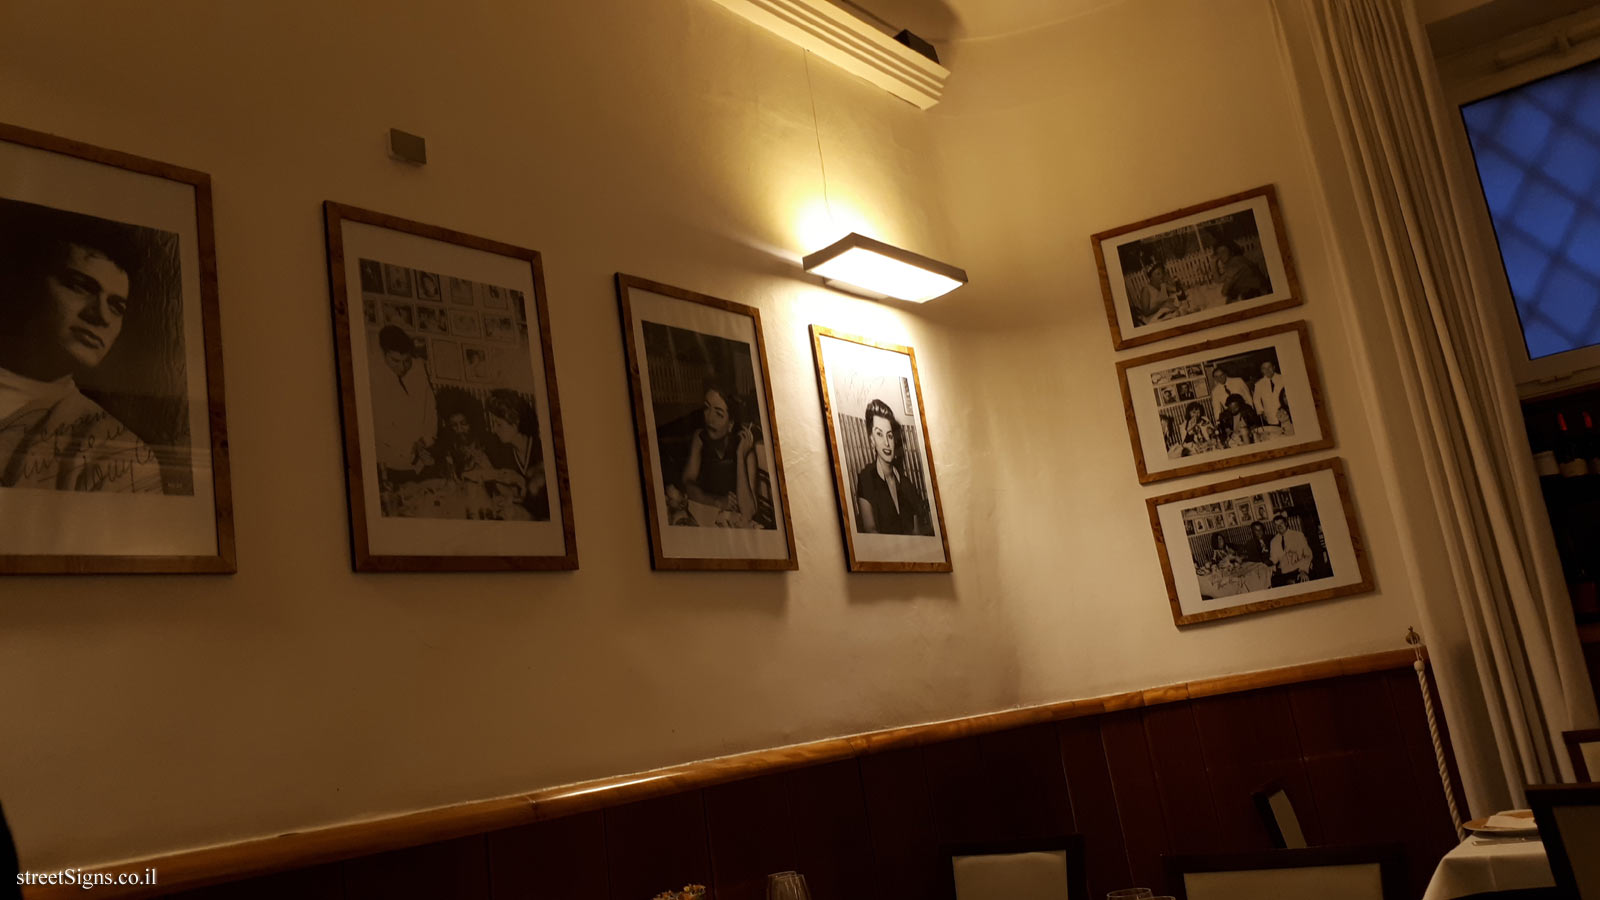 Pictures of famous people who visited the Alfredo Restaurant